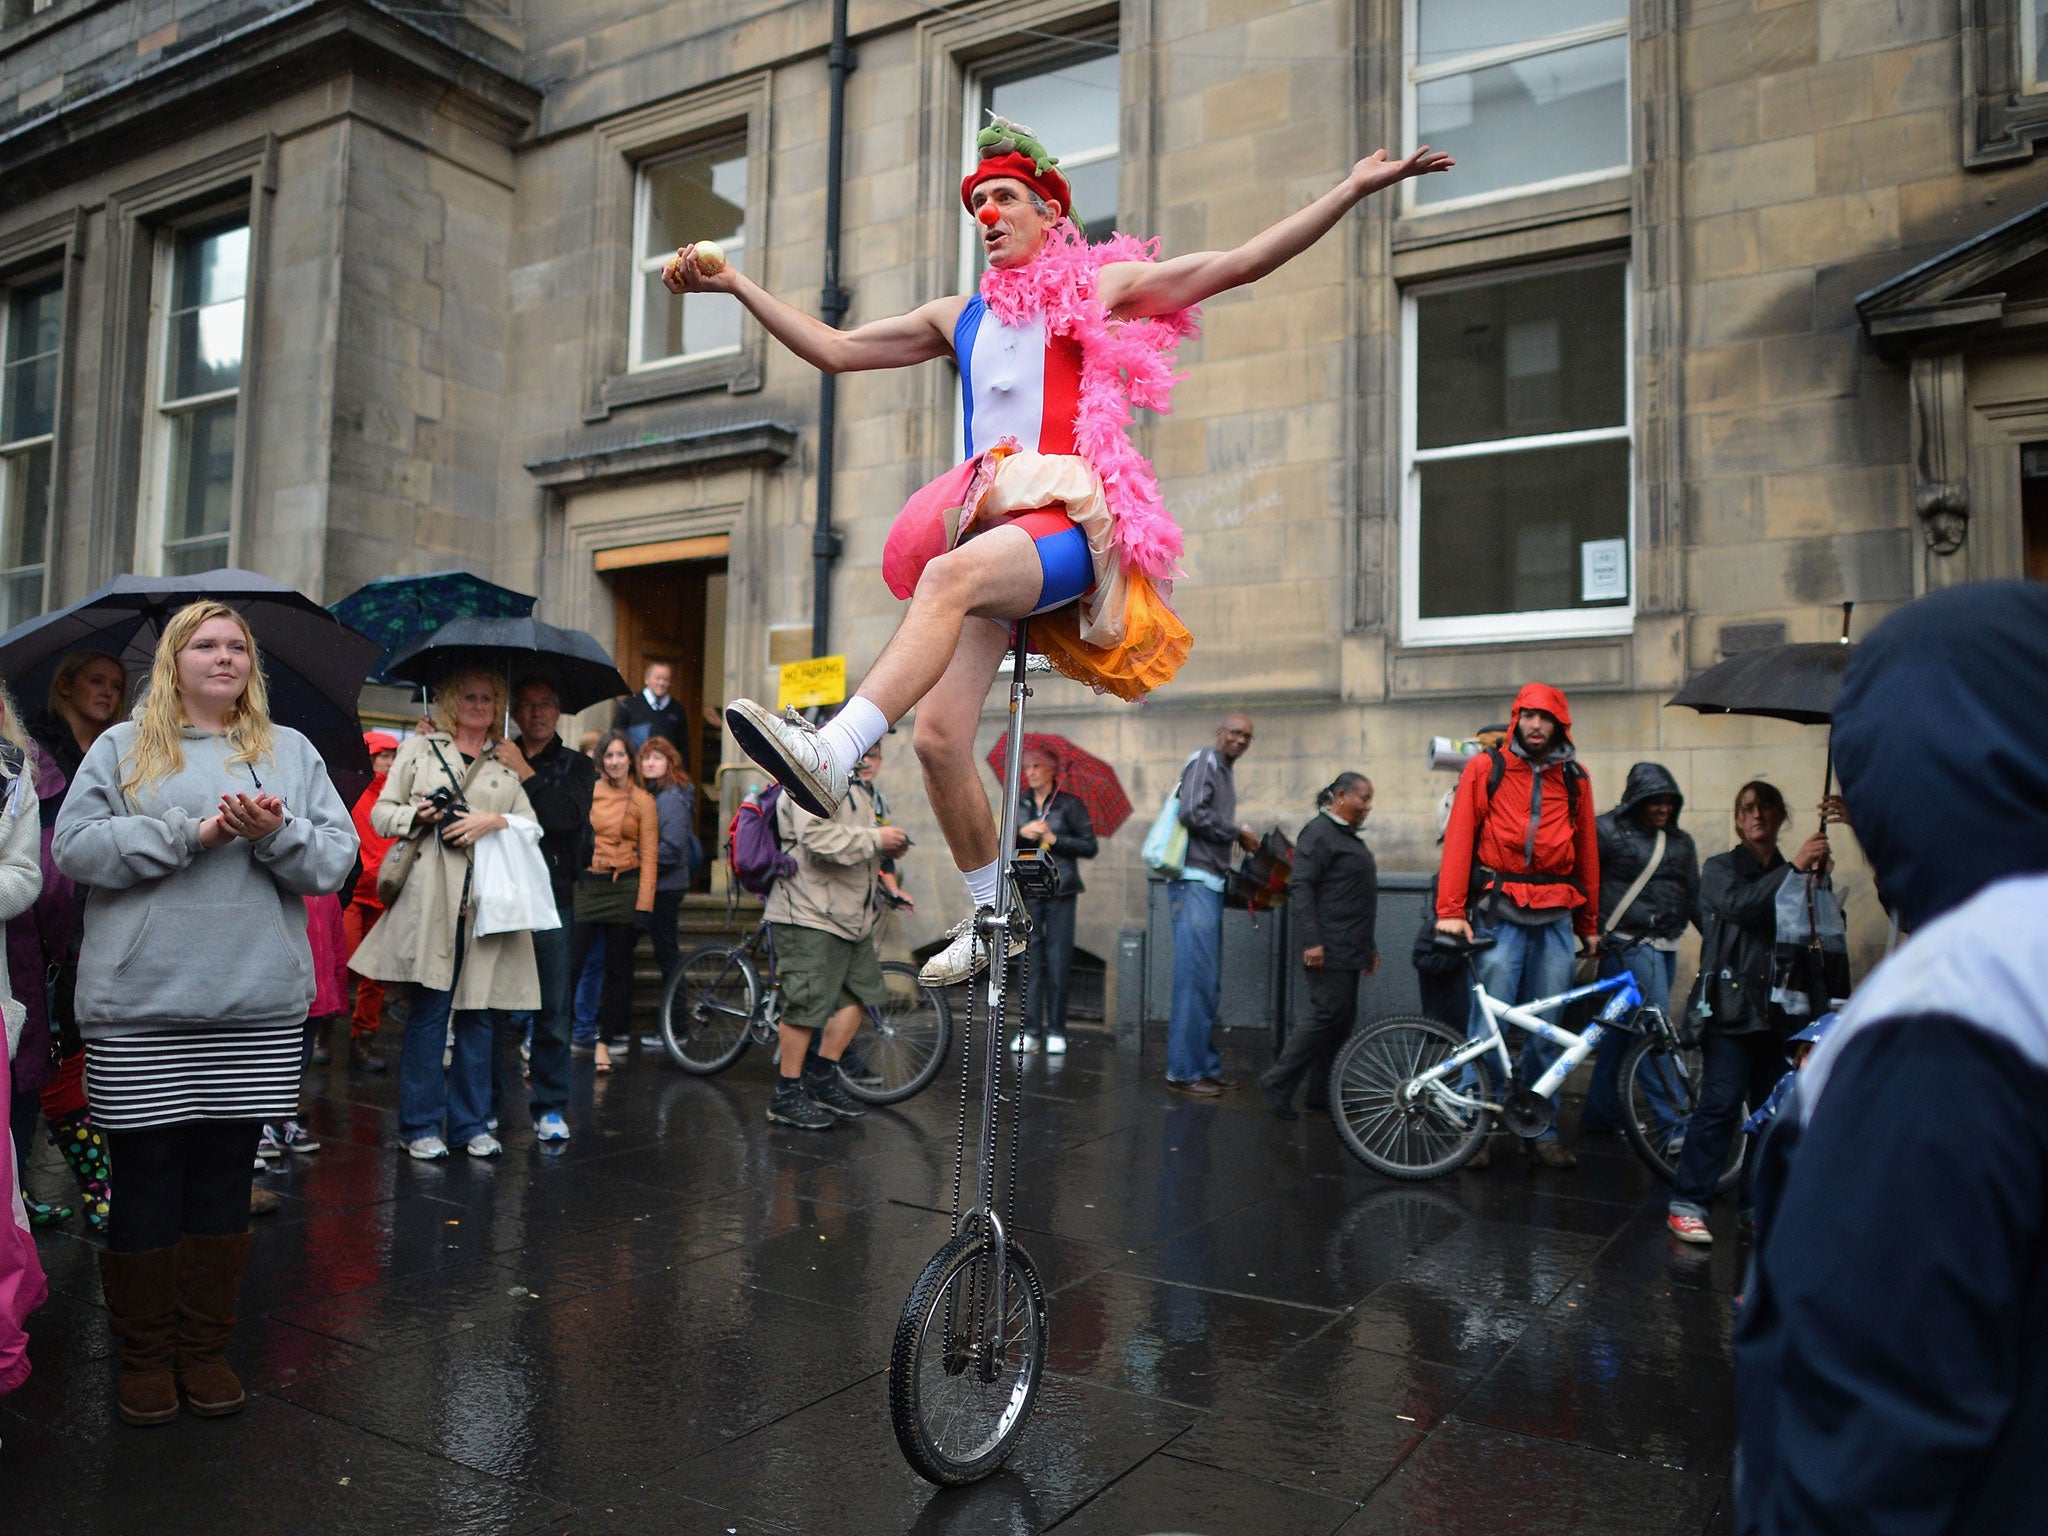 Street entertainers perform on the Royal Mile on the final day of the Edinburgh Festival Fringe on August 27, 2012 in Edinburgh, Scotland.